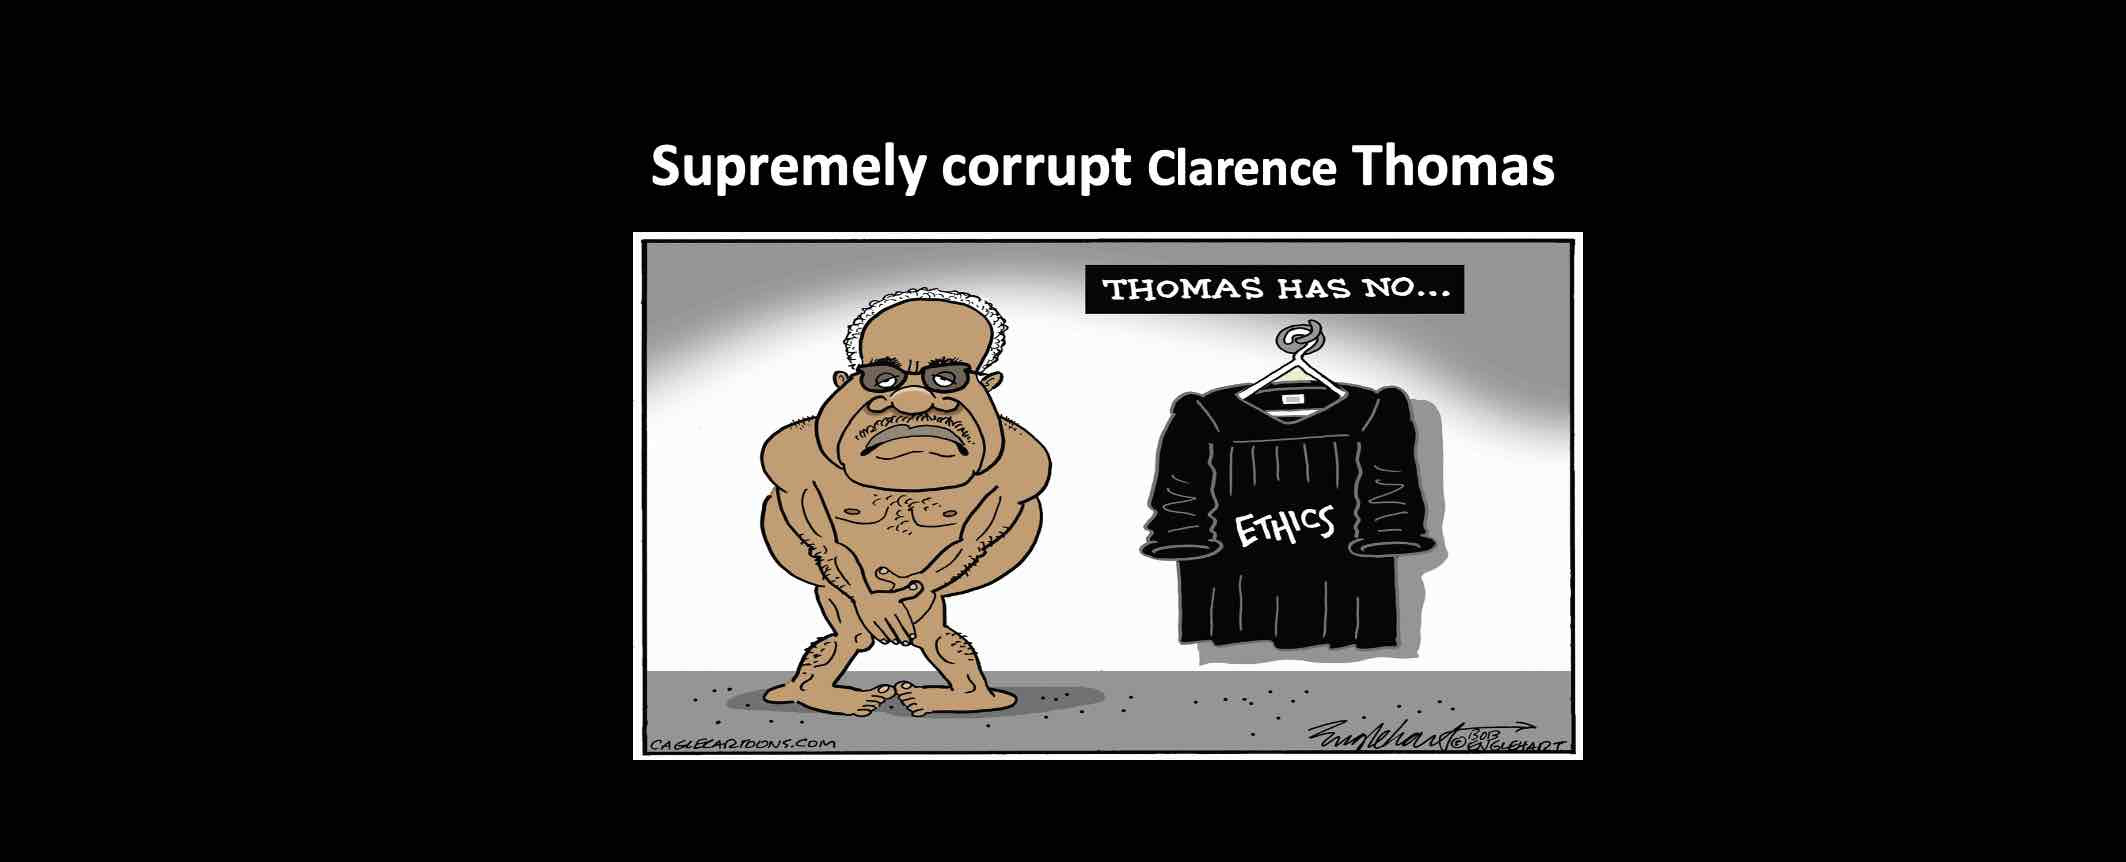 For over 20 years Clarence Thomas has been treated to (unrevealed) luxury vacations by billionaire Republican donor Harlan Crow. 